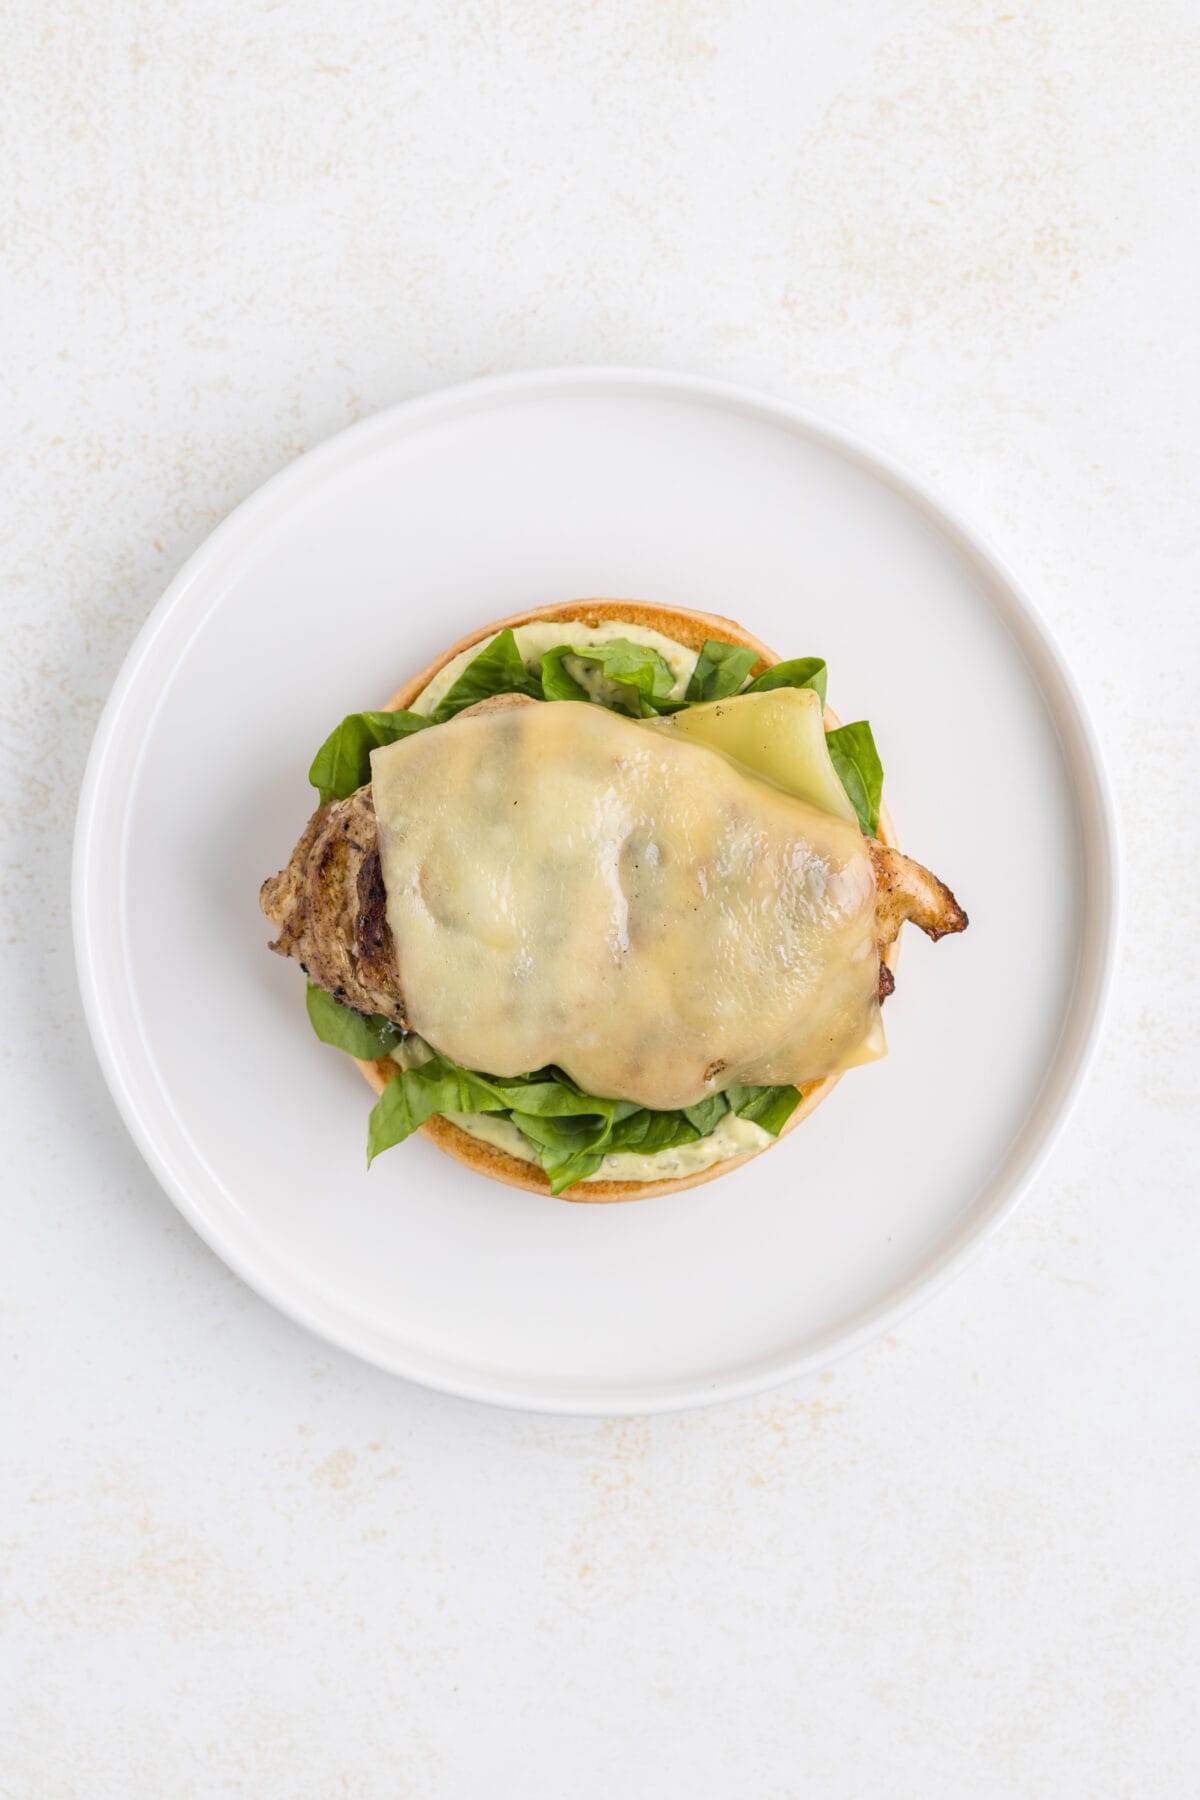 grilled chicken breast with melted Swiss cheese on top on a bottom half of a brioche bun.